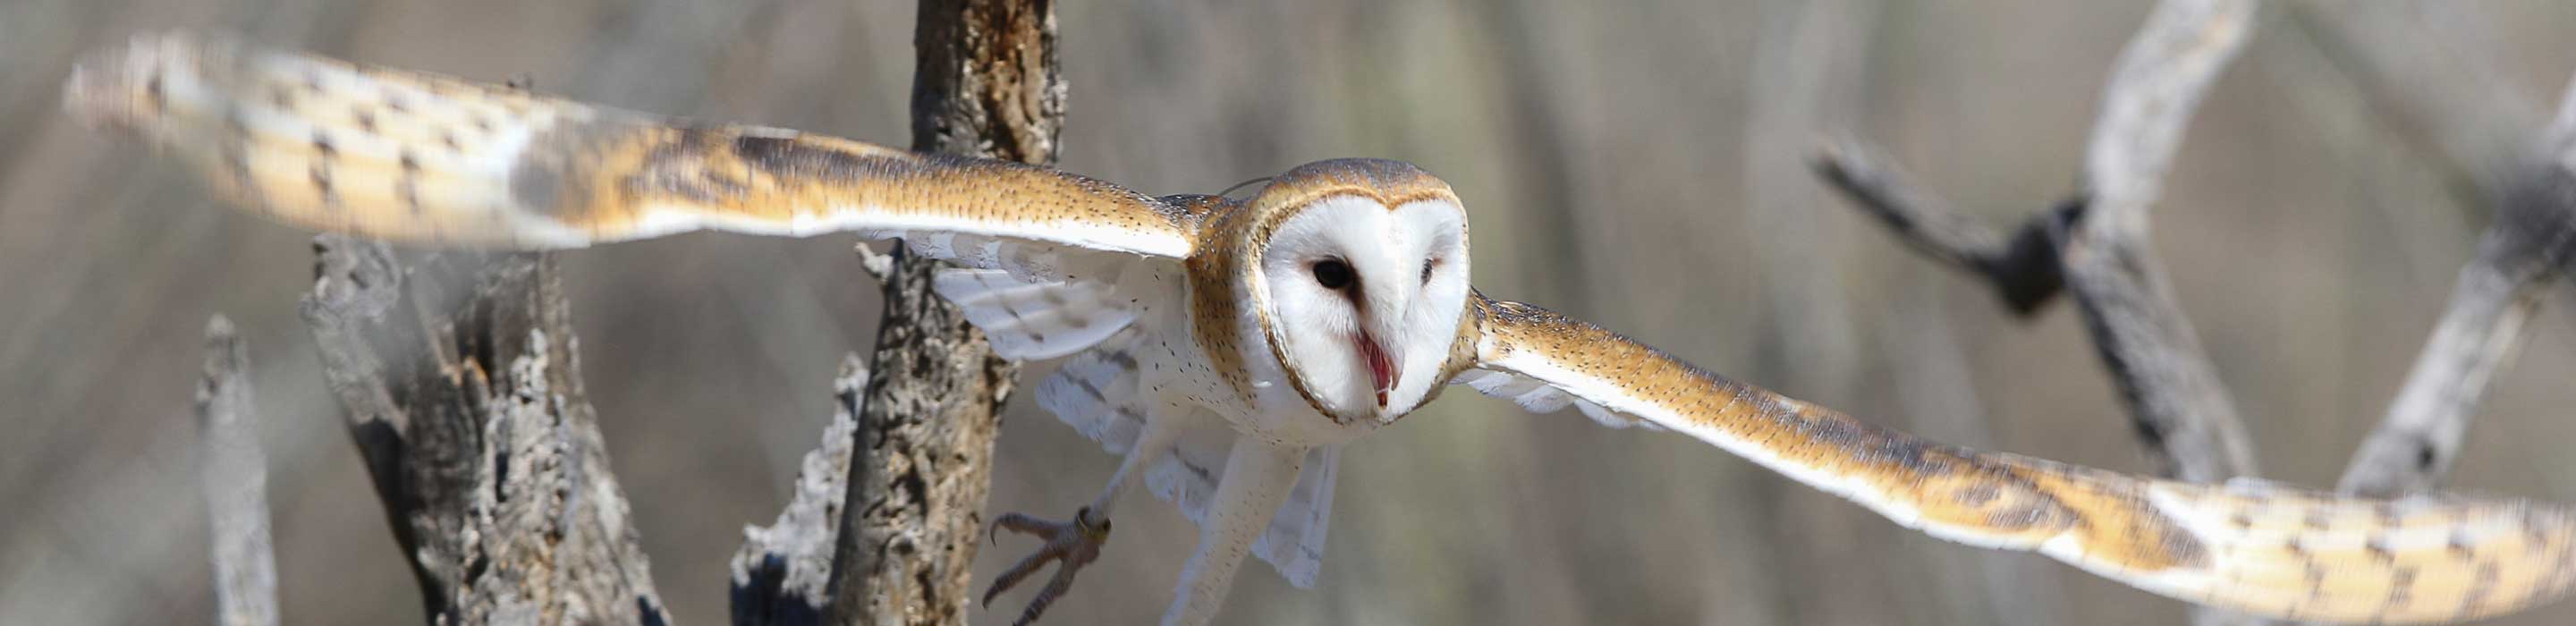 Owl with wings spread